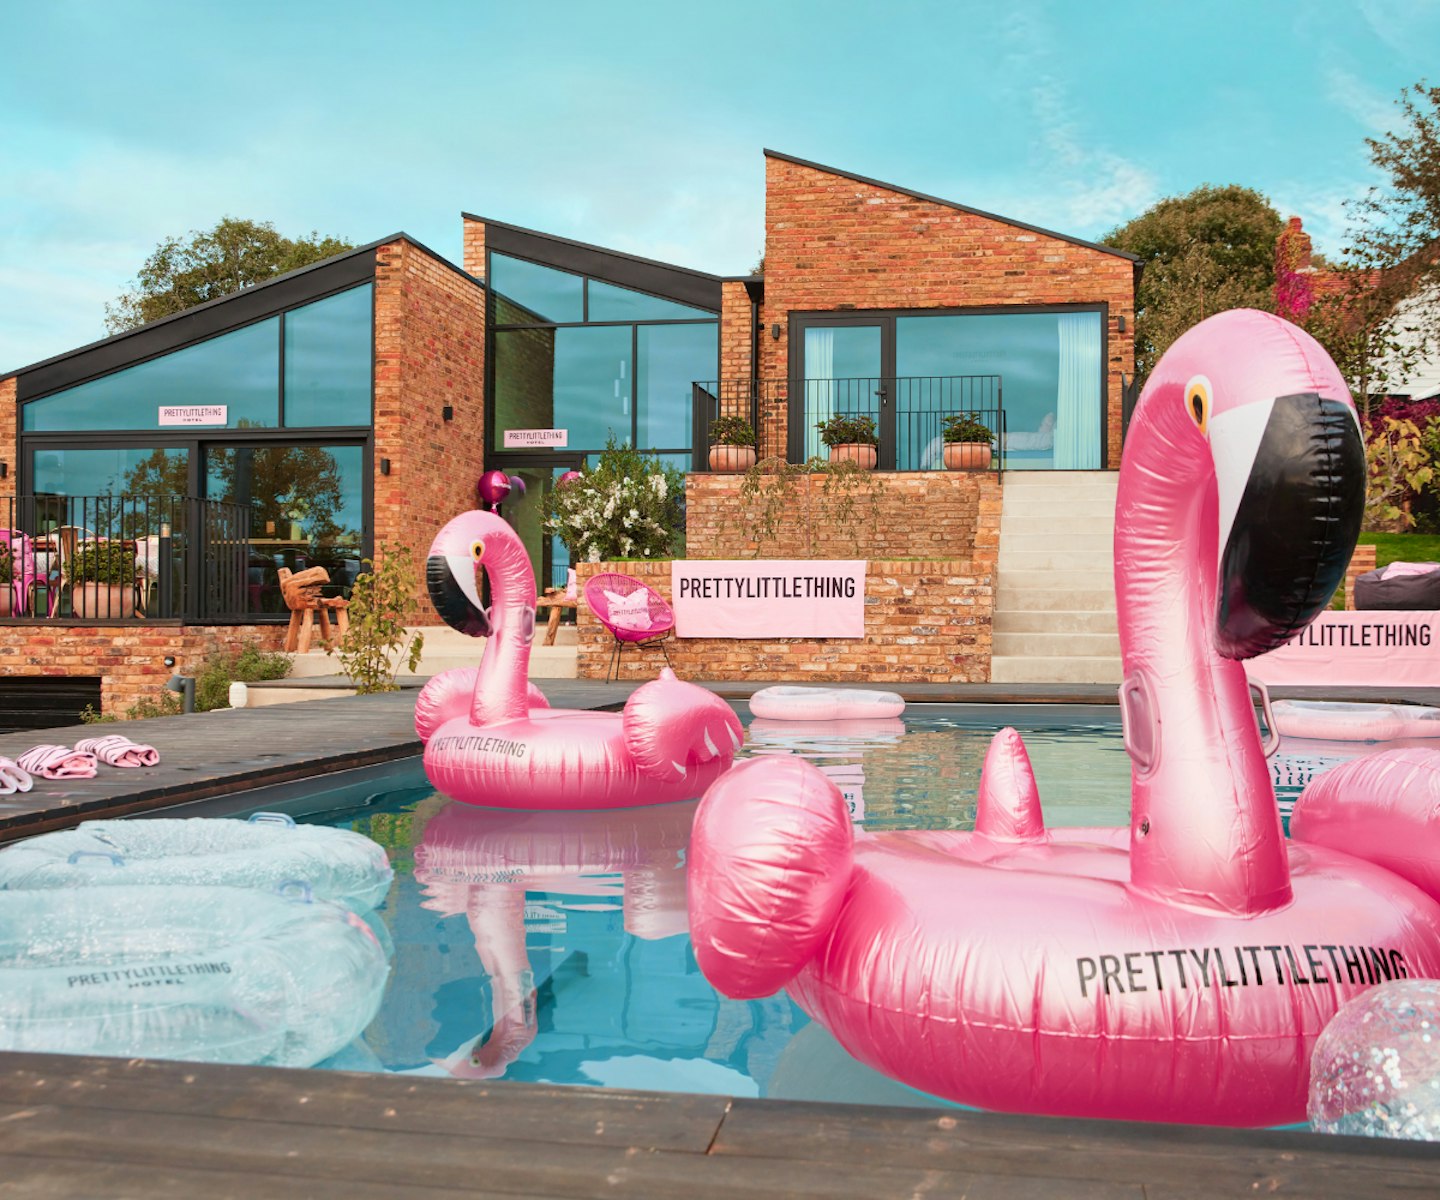 The PrettyLittleThing Hotel is here and it looks FANCY